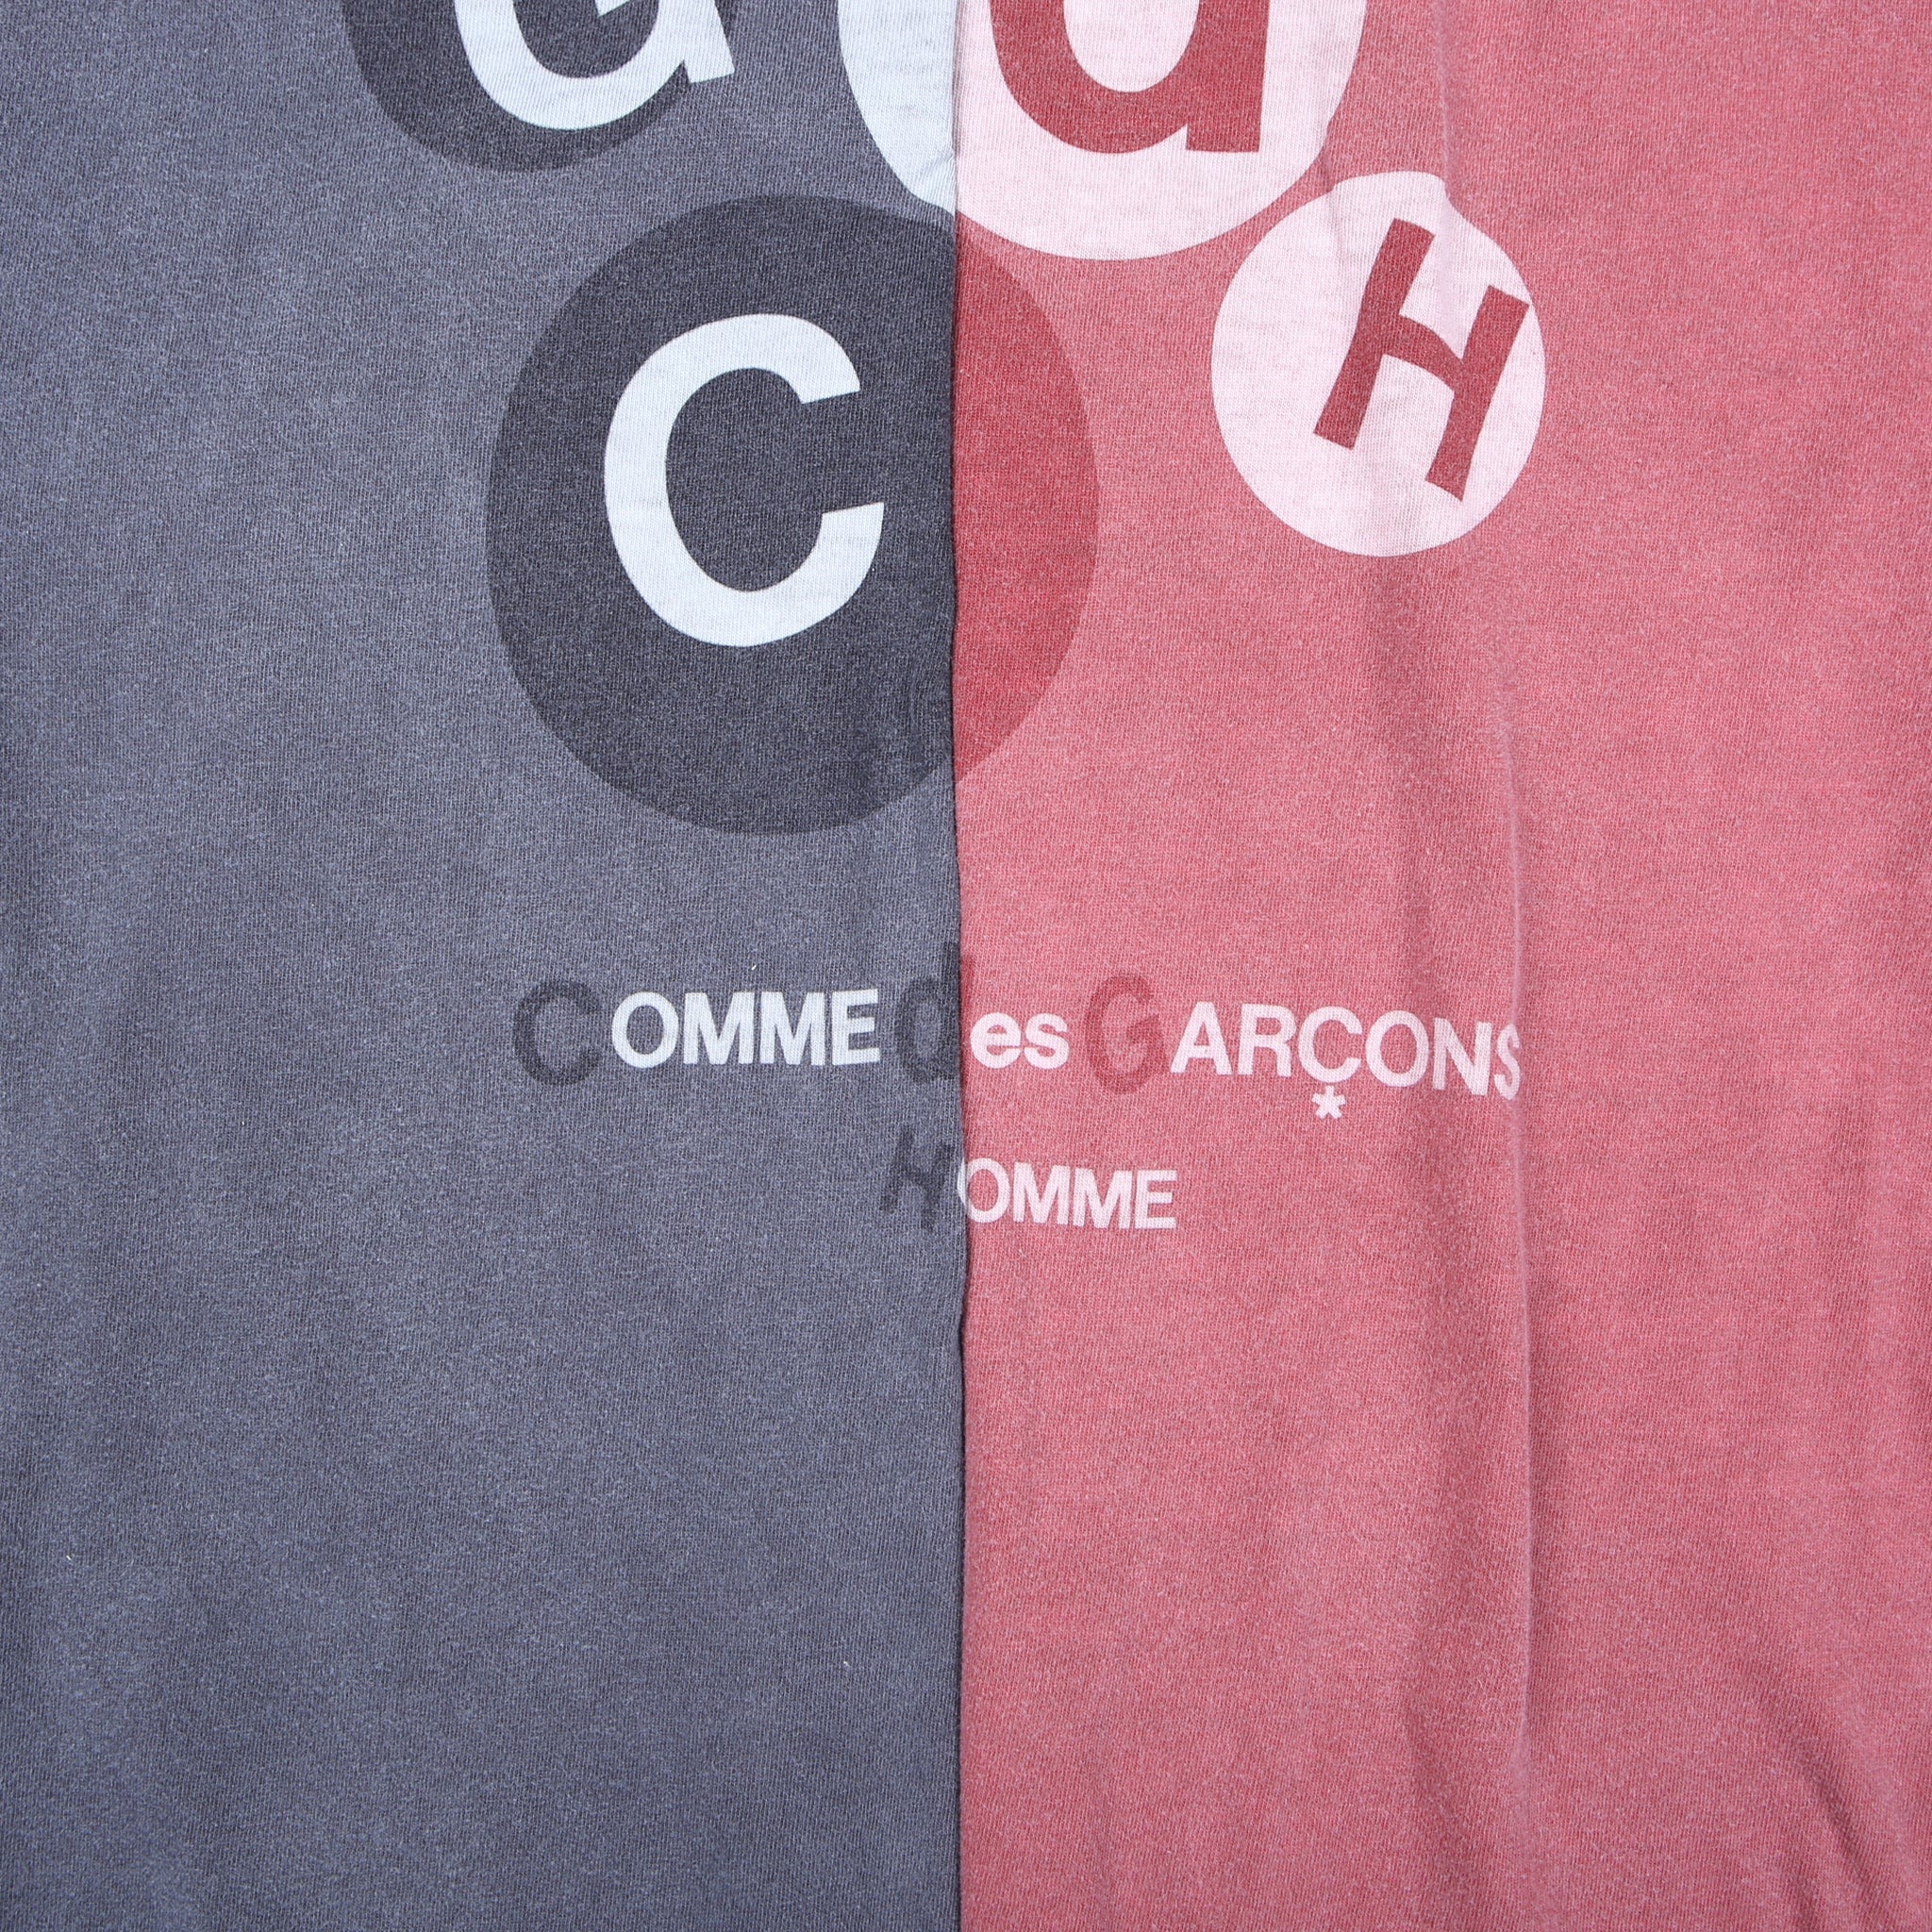 Comme Des Garcons Homme SS05 Dyed T-Shirt